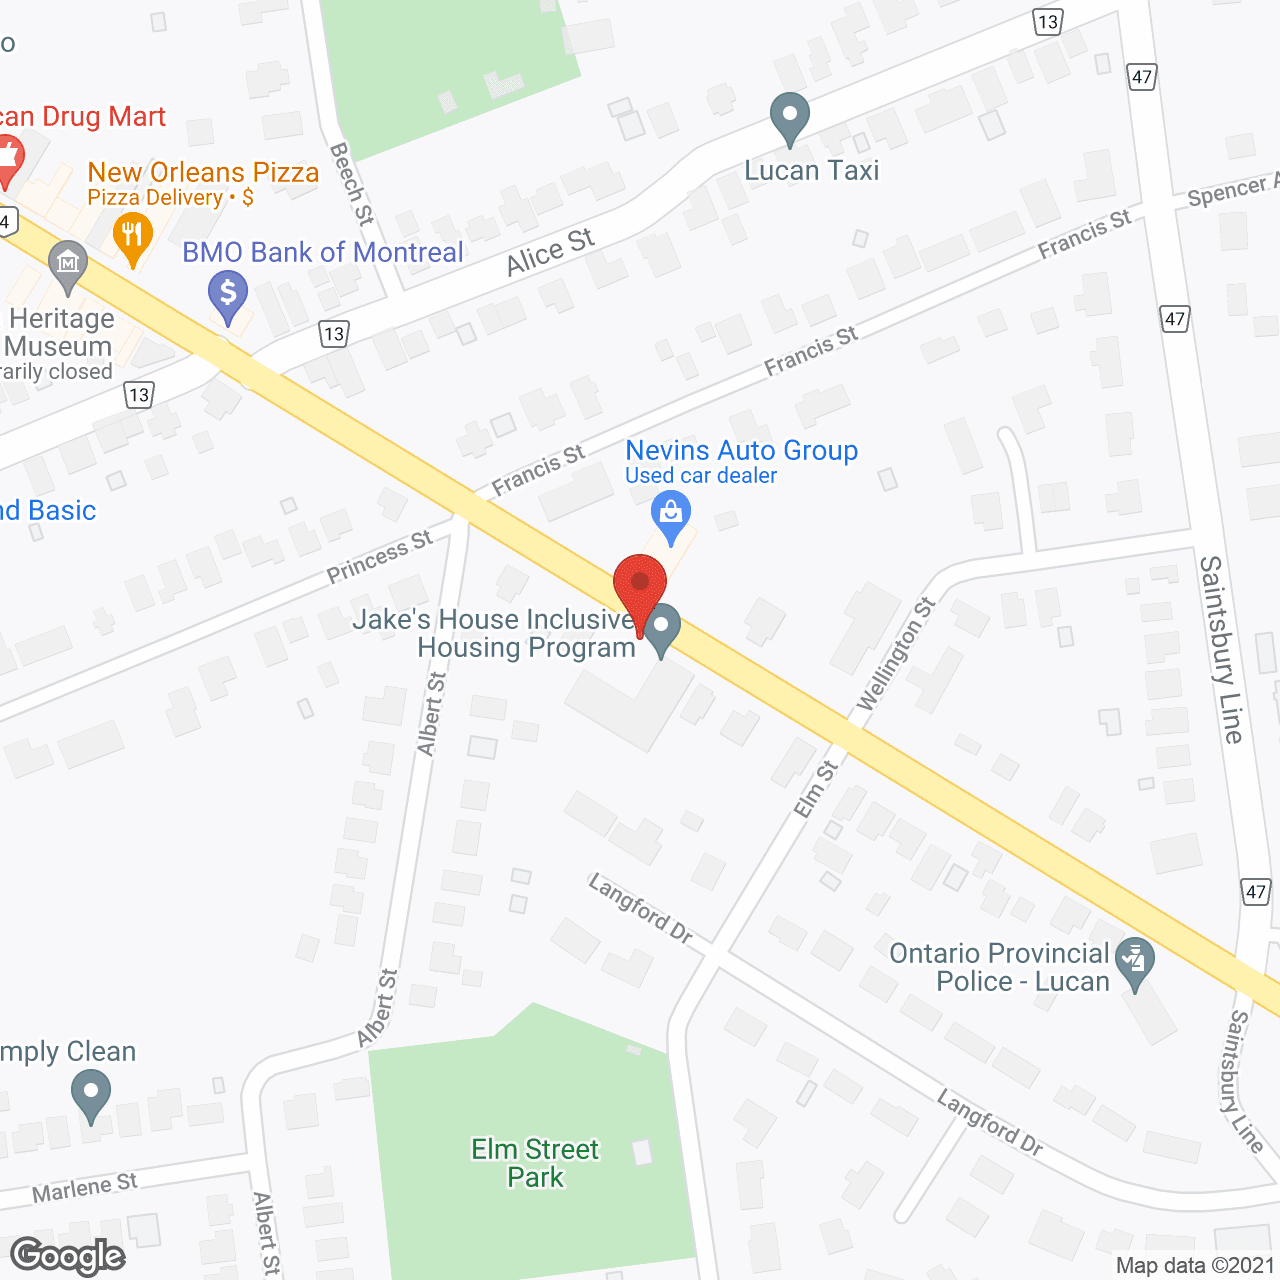 Prince George Retirement Residence in google map